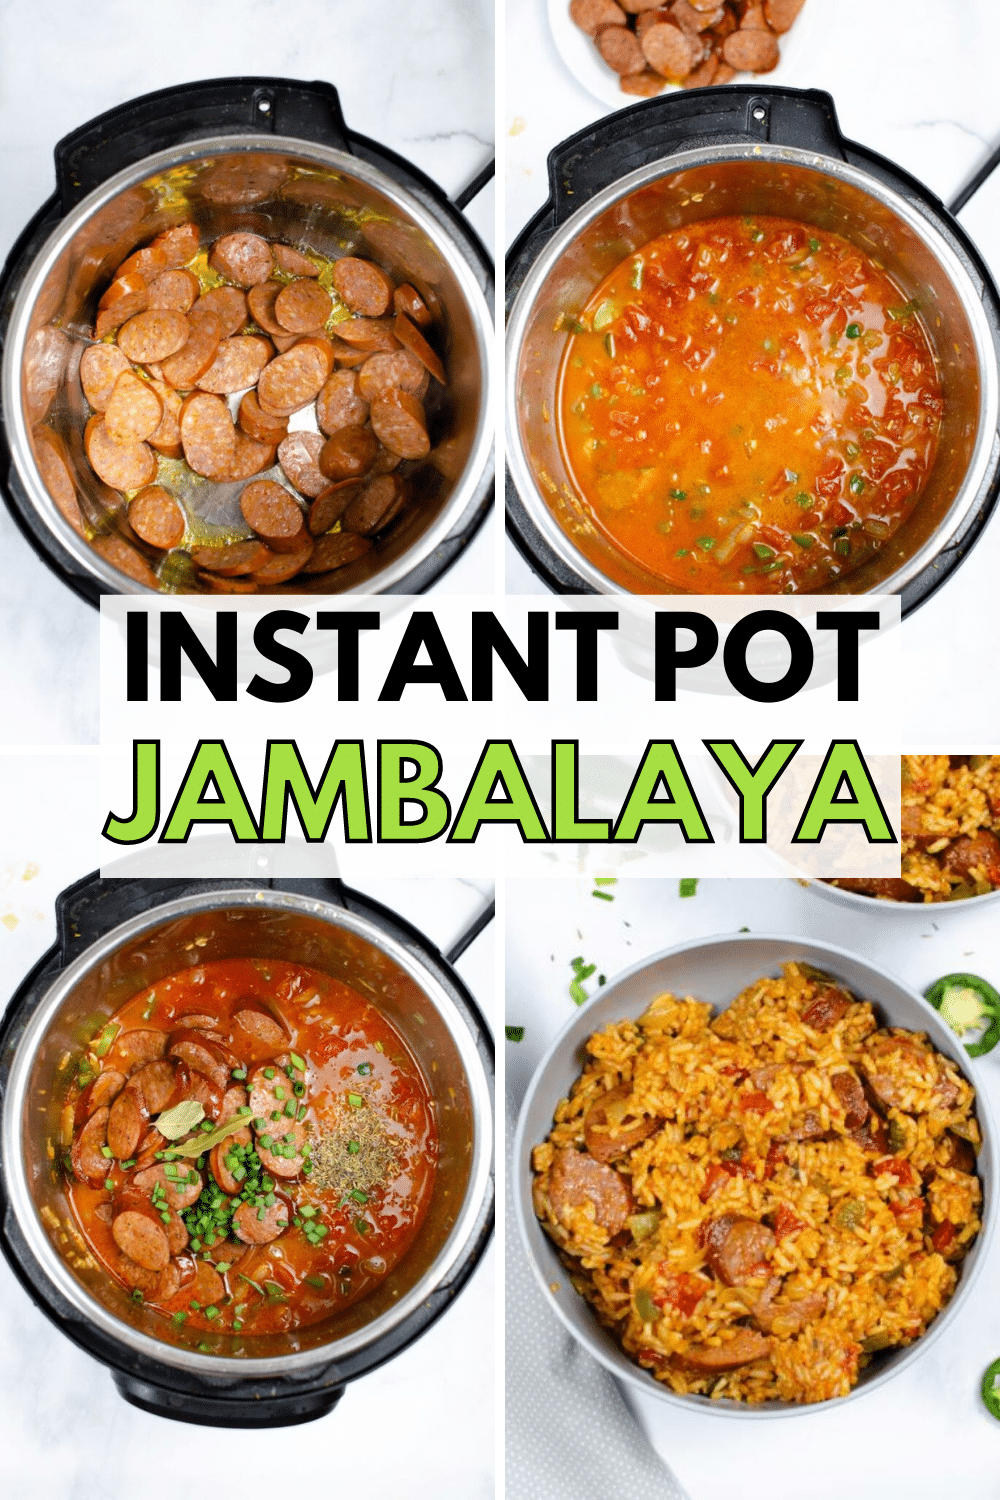 Instant pot chicken jambalaya has chunky bites of andouille sausage that contrast perfectly with veggies and rice for your weeknight dinner! Make this instant pot jambalaya recipe in 30 minutes. #instantpot #pressurecooker #chicken #jambalaya #andouillesausage via @wondermomwannab